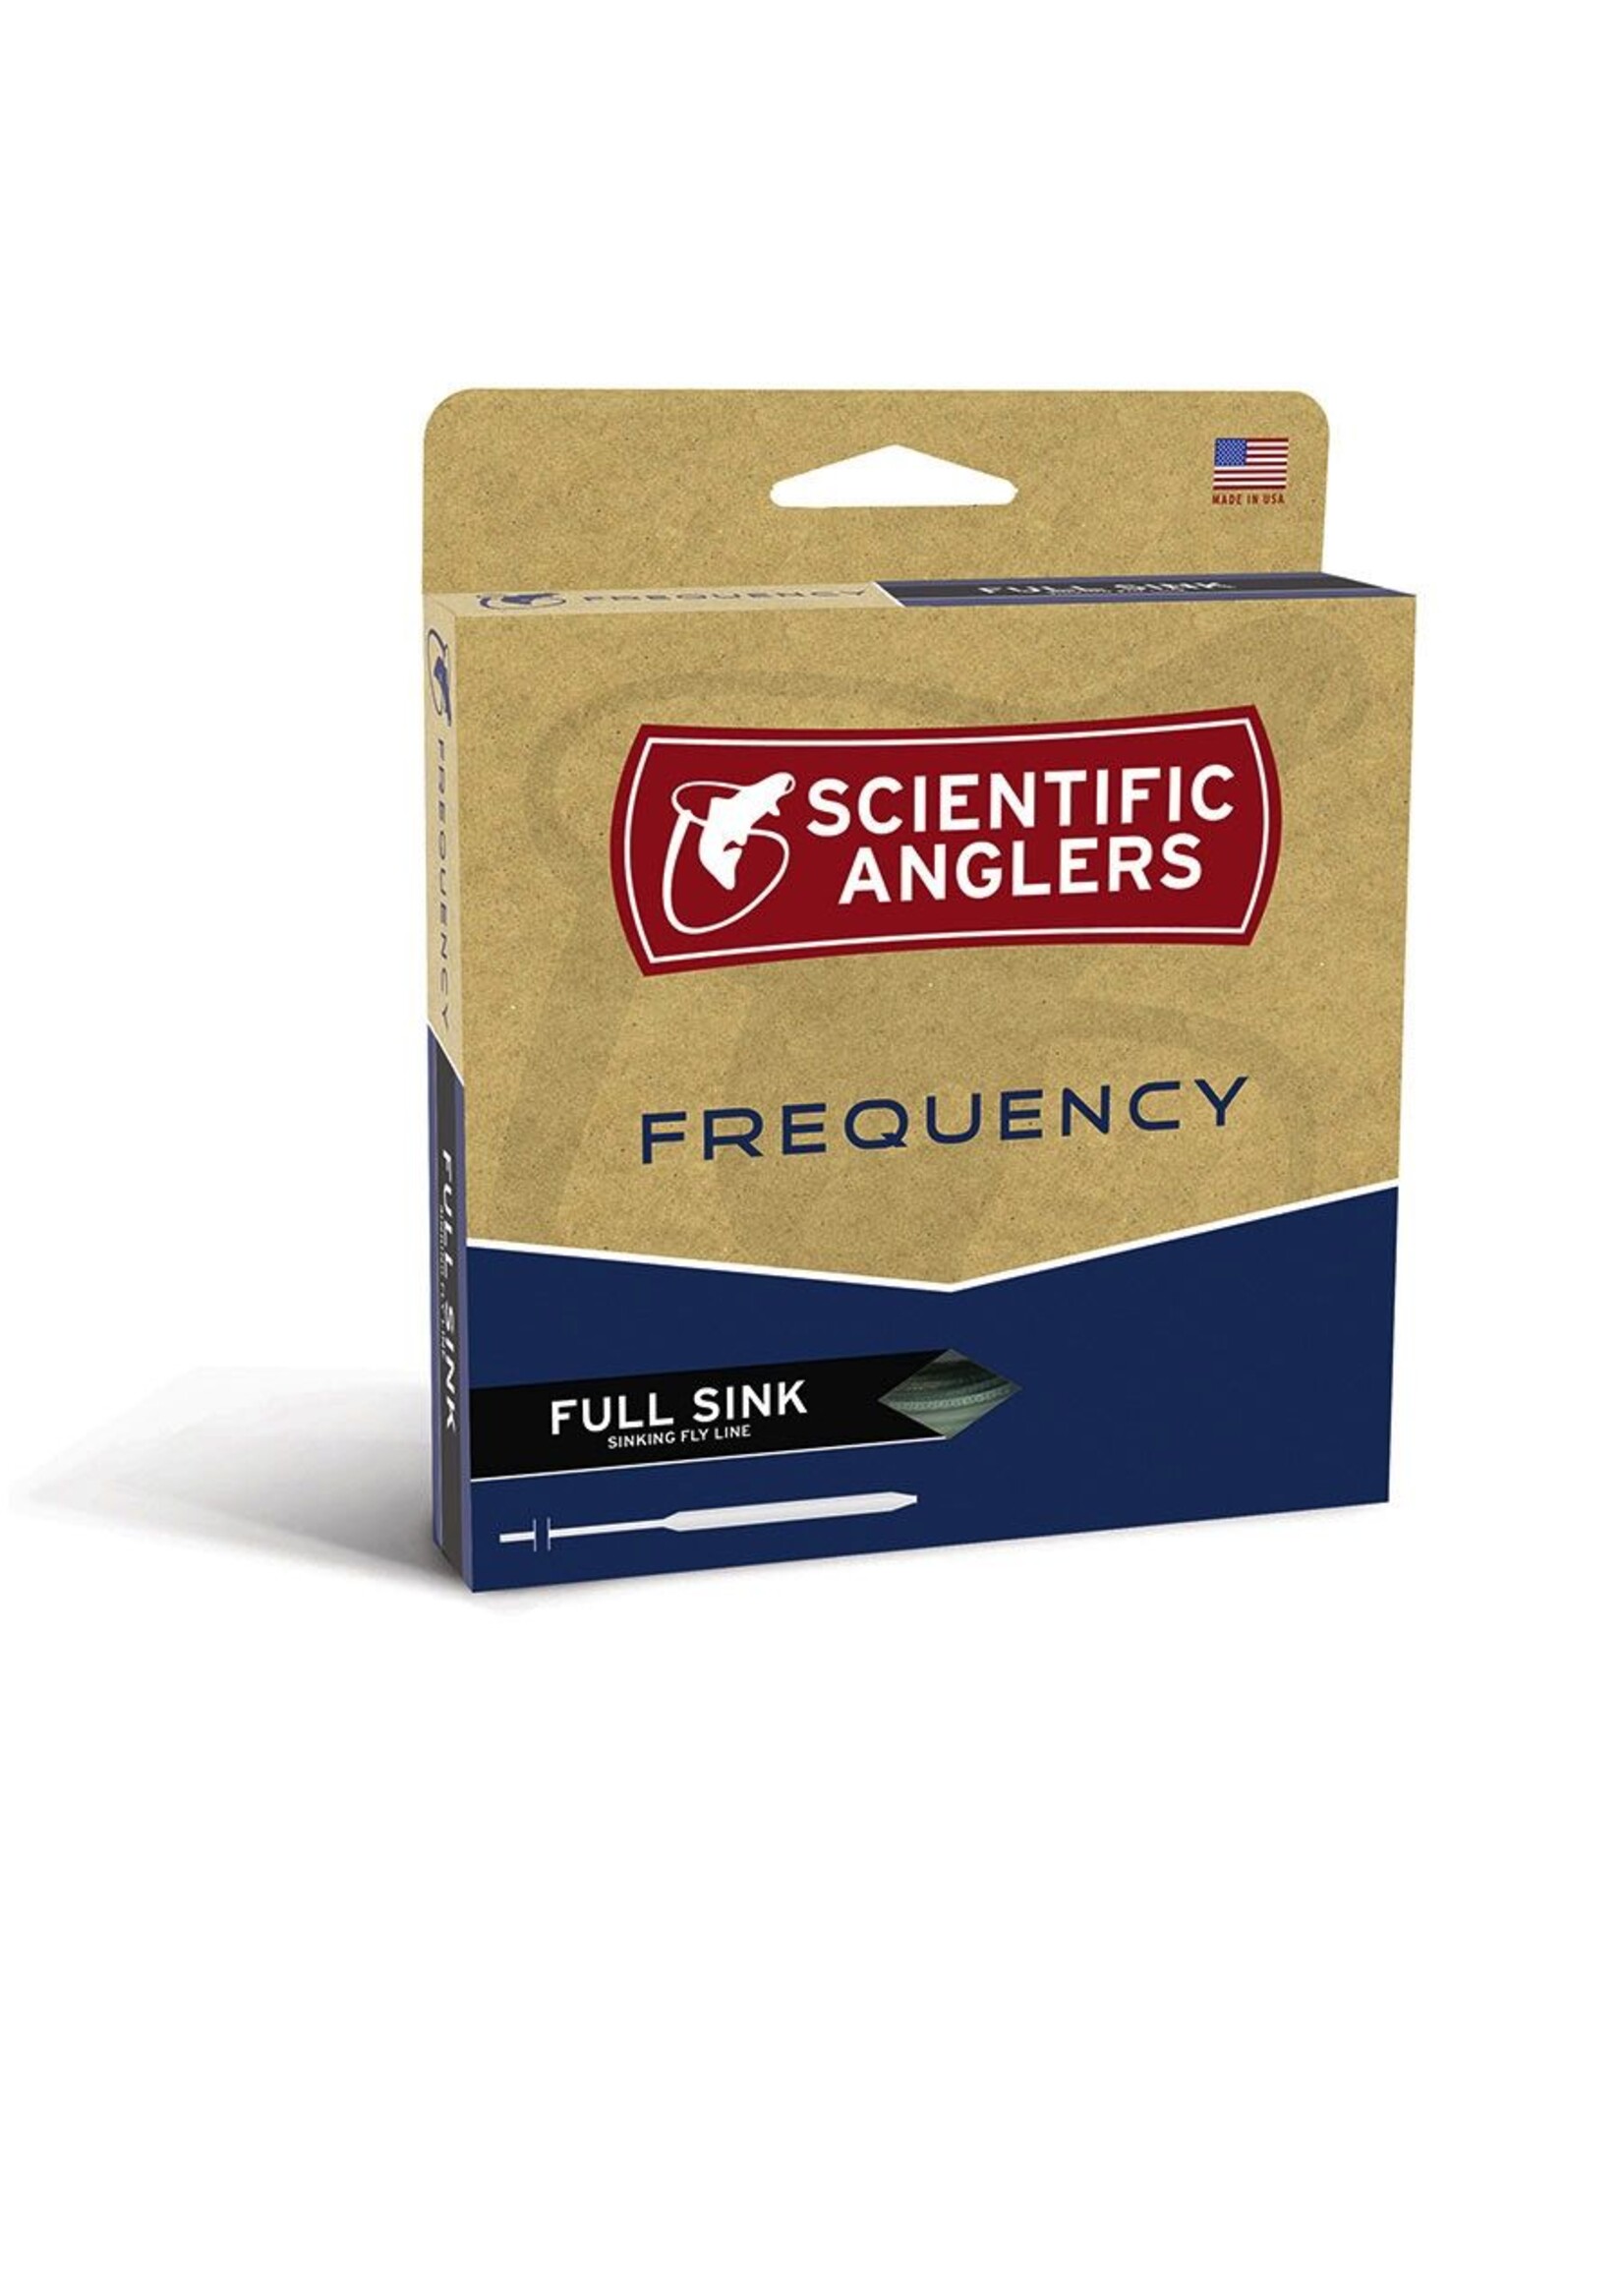 SCIENTIFIC ANGLERS SCIENTIFIC ANGLERS FREQUENCY